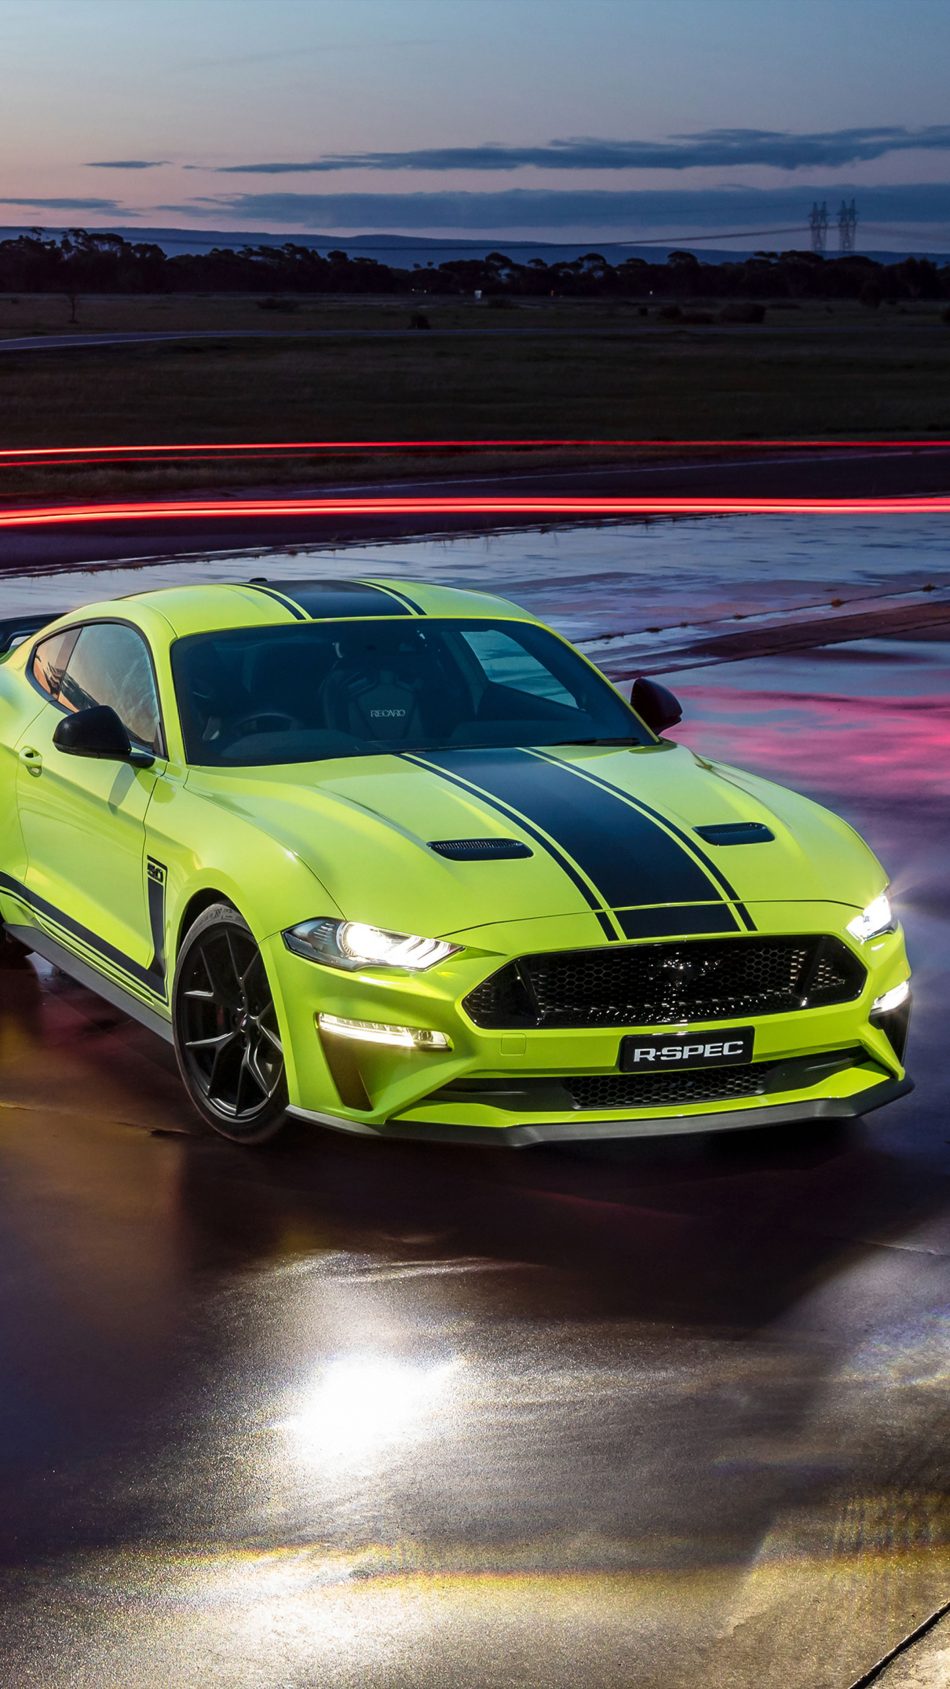 Ford Mustang Gt Fastback R-spec 2019 4k Ultra Hd Mobile - Ford Mustang R Spec - HD Wallpaper 